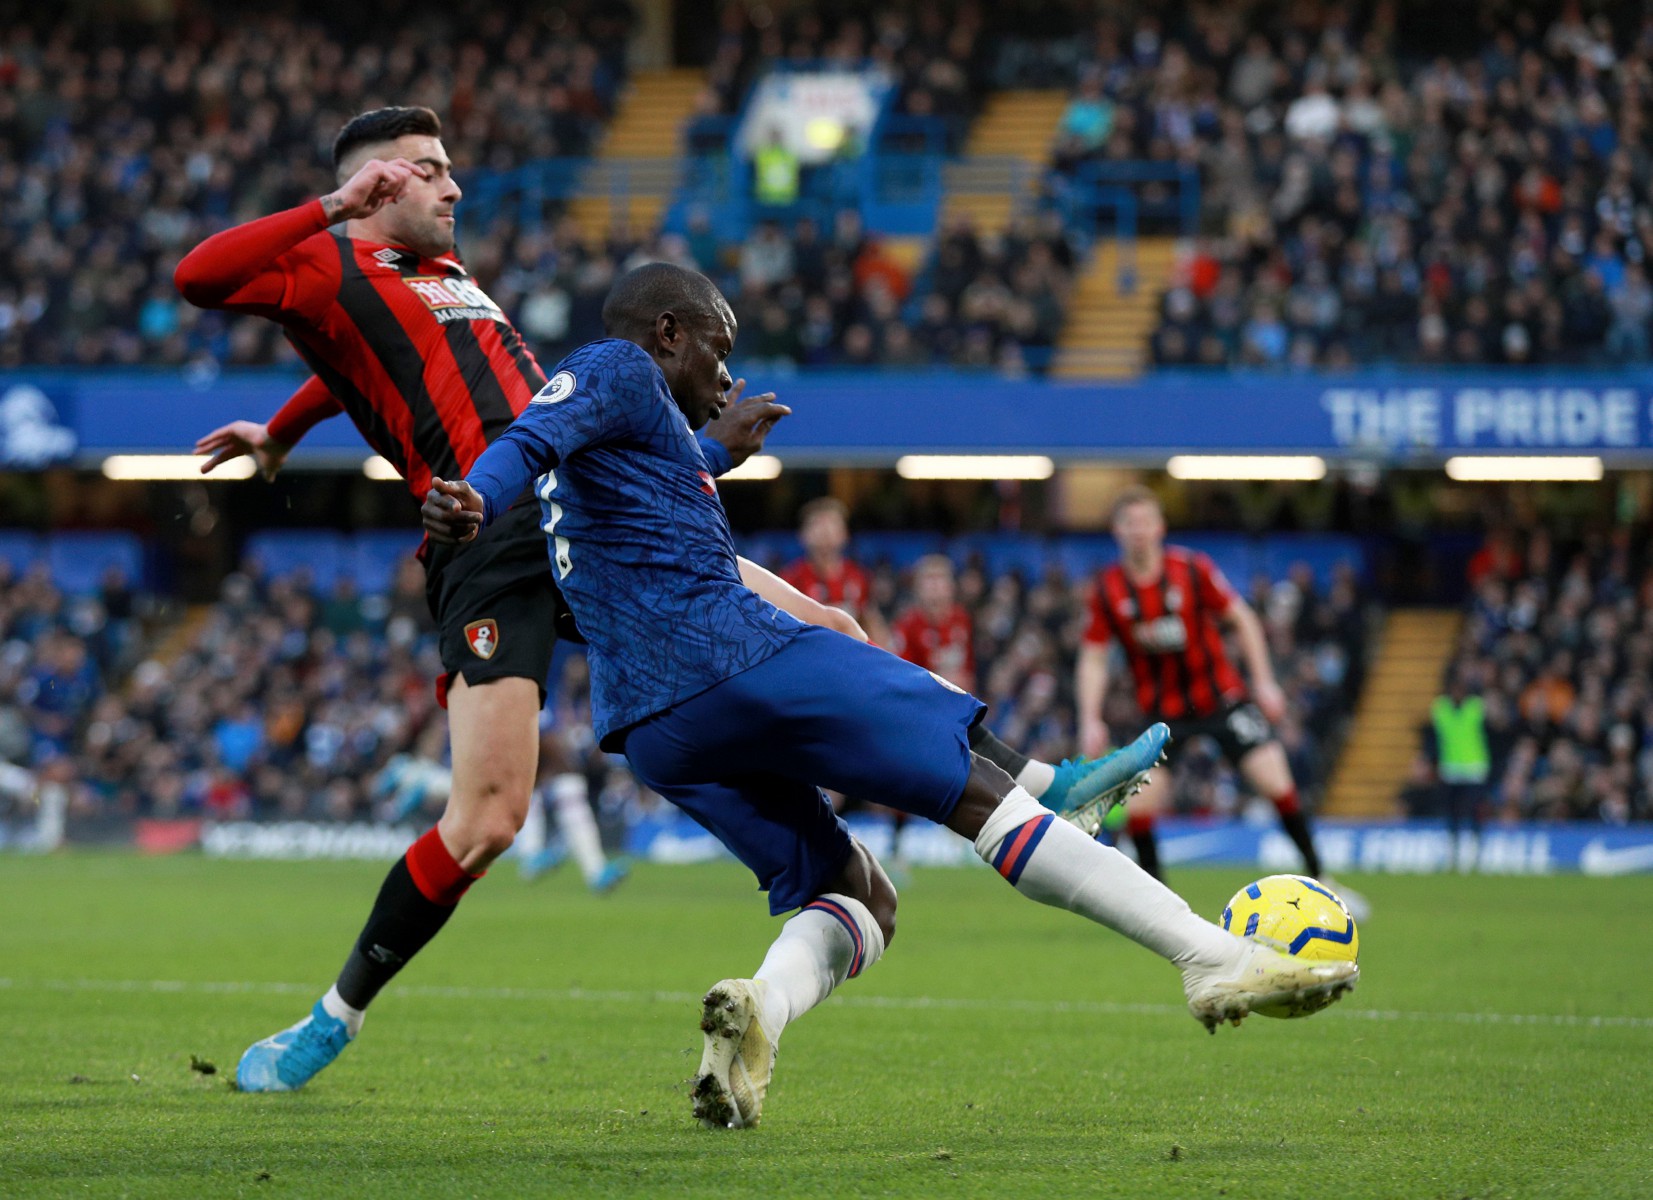 , Chelsea ratings: Ruthless Rudiger led from the back while Emerson made Chilwell transfer look a must in Bournemouth loss